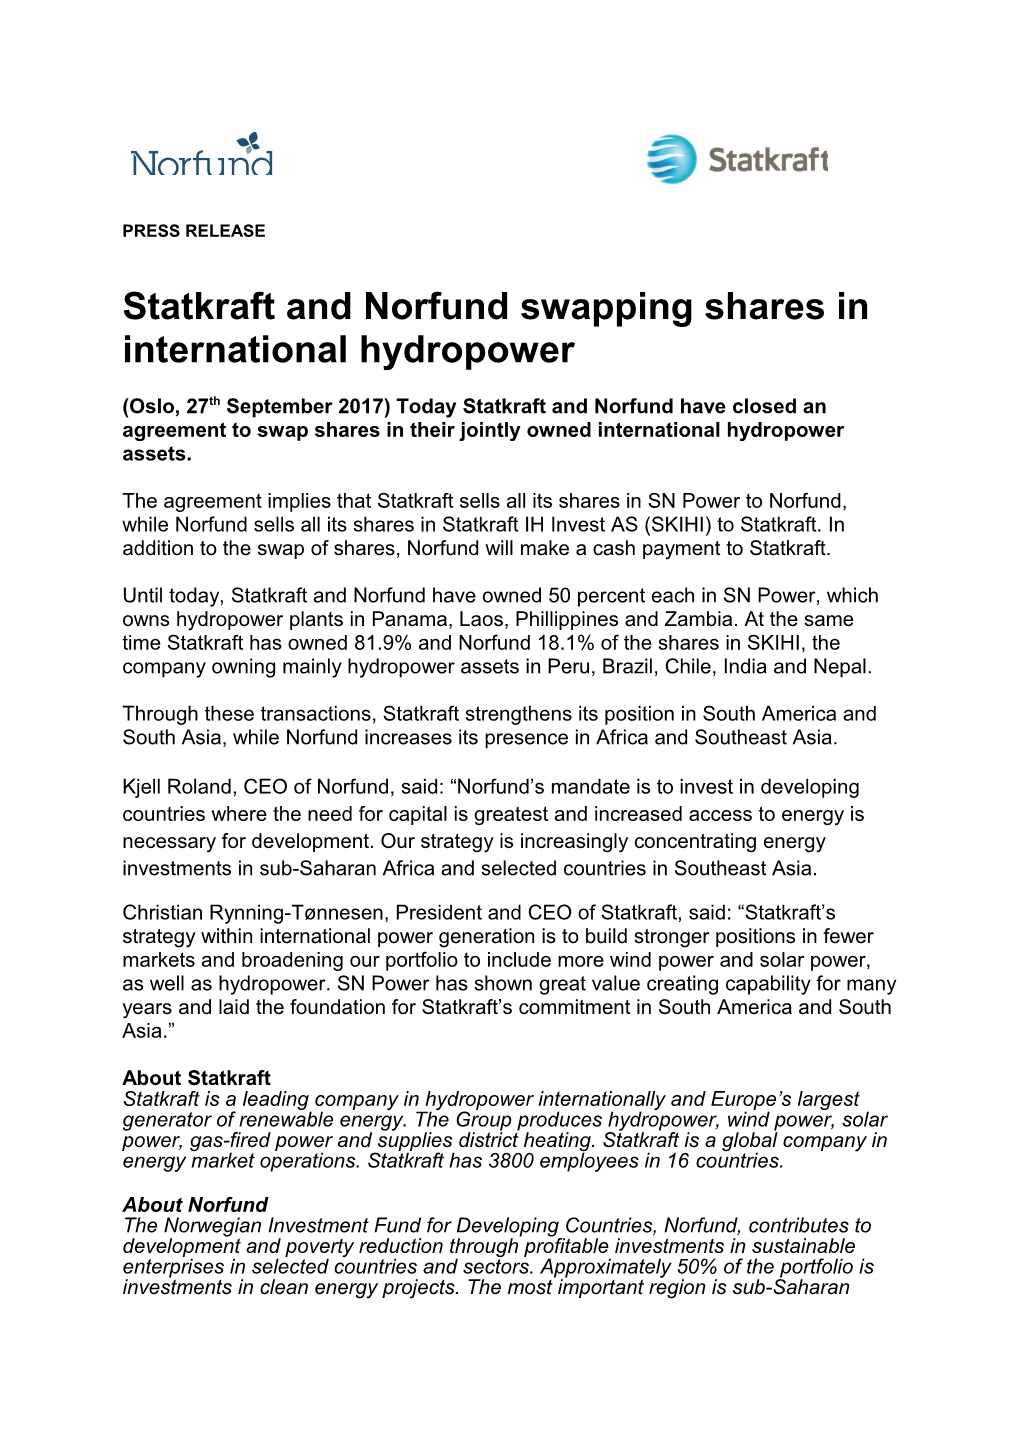 Statkraft and Norfund Swapping Shares in International Hydropower